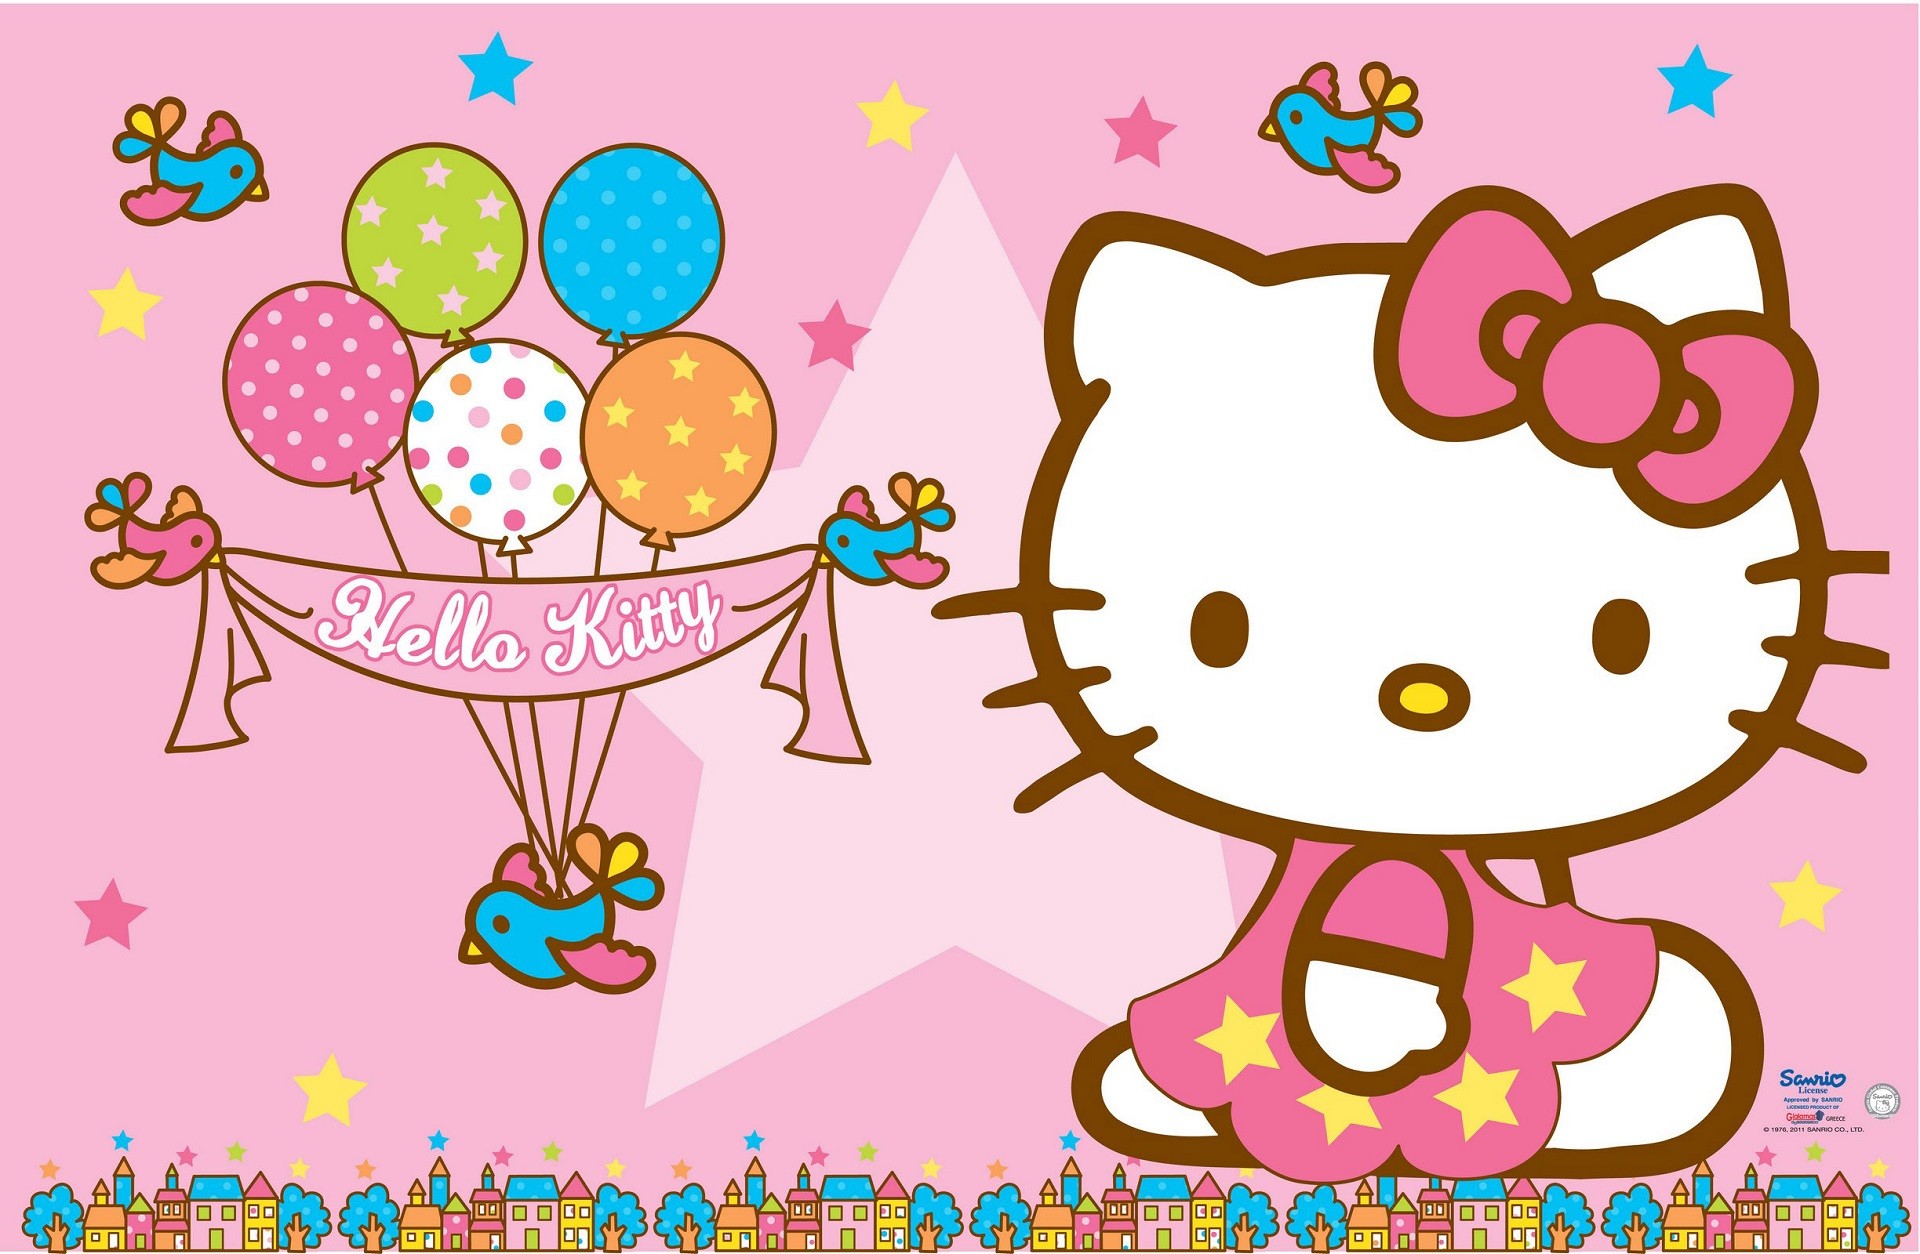 1920x1254 Hello Kitty Wallpapers Collection For Free Download 1920Ã1254